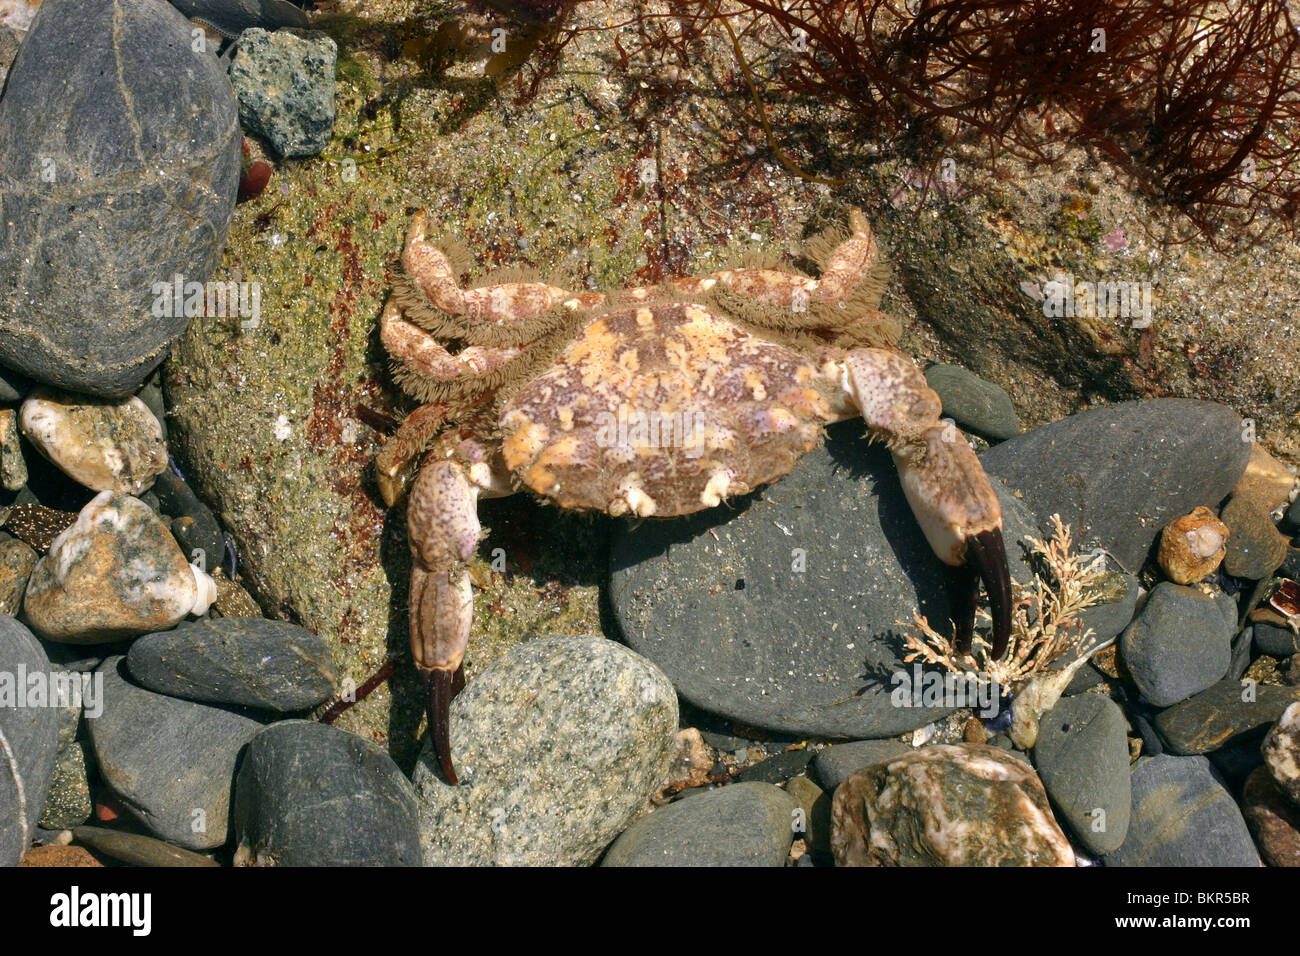 Risso's / Brown-clawed furrowed crab (Xantho pilipes) in a rockpool, UK. Stock Photo